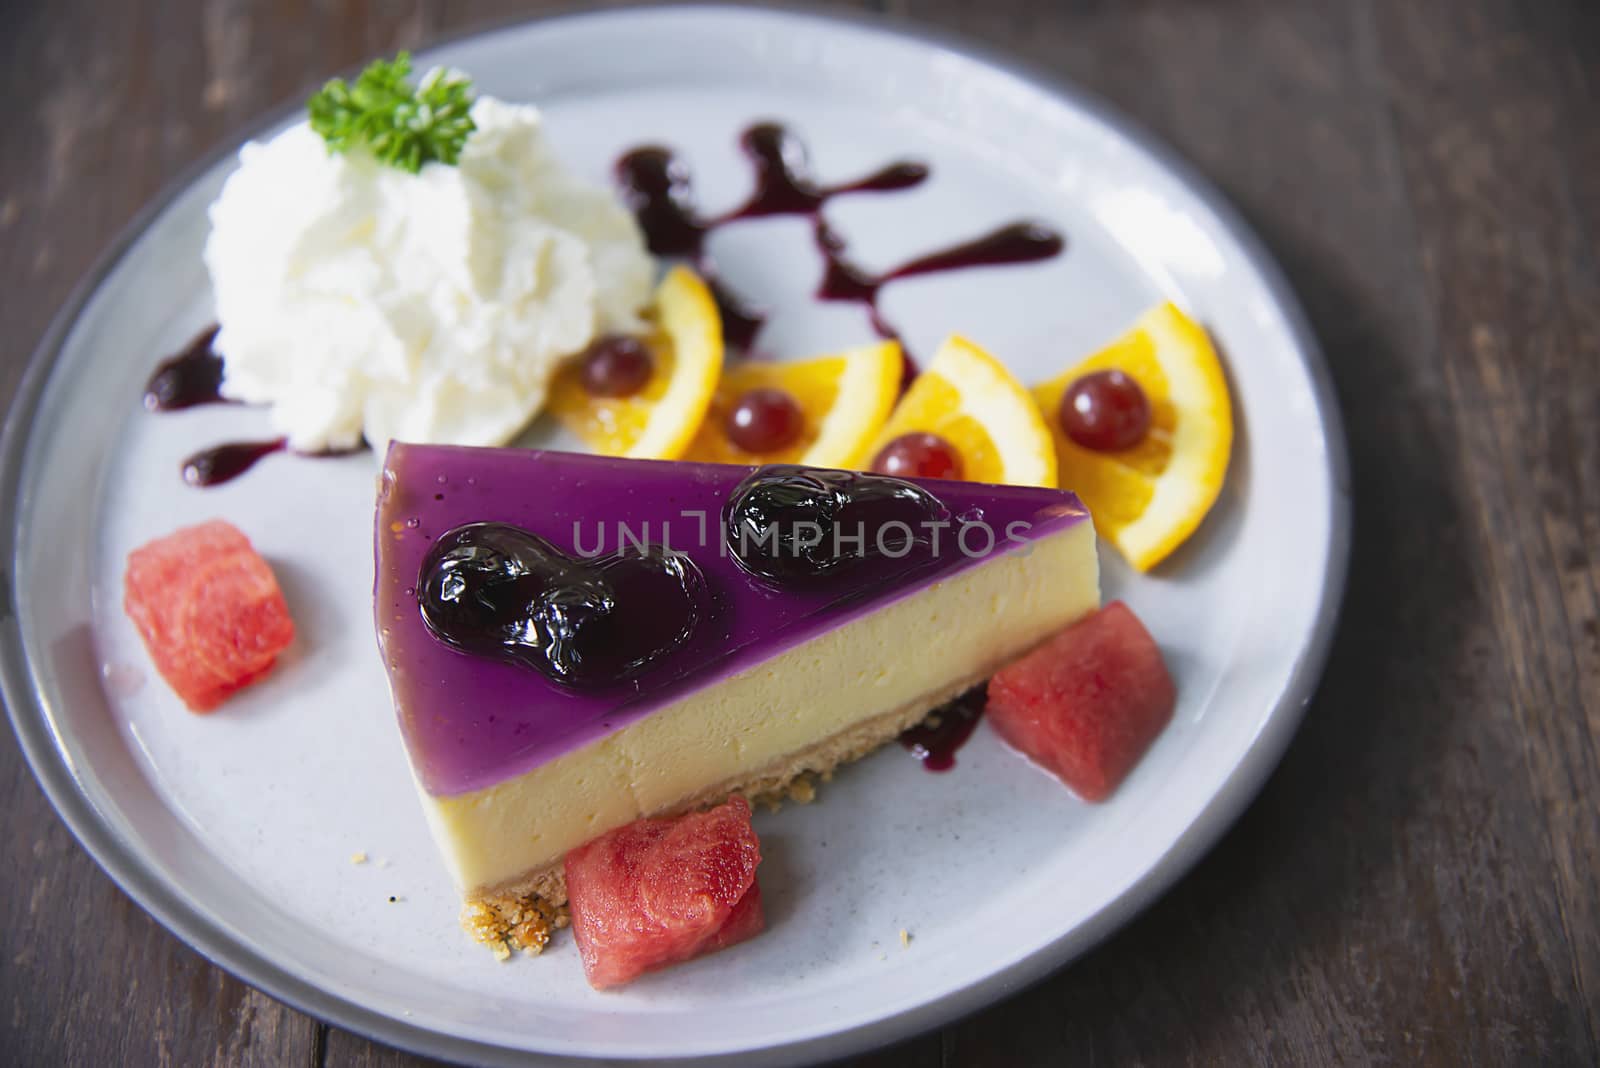 Colorful cheese cake blueberry favor with well decorated fruit pieces and whipped cream in white plate - cake recipe menu concept by pairhandmade